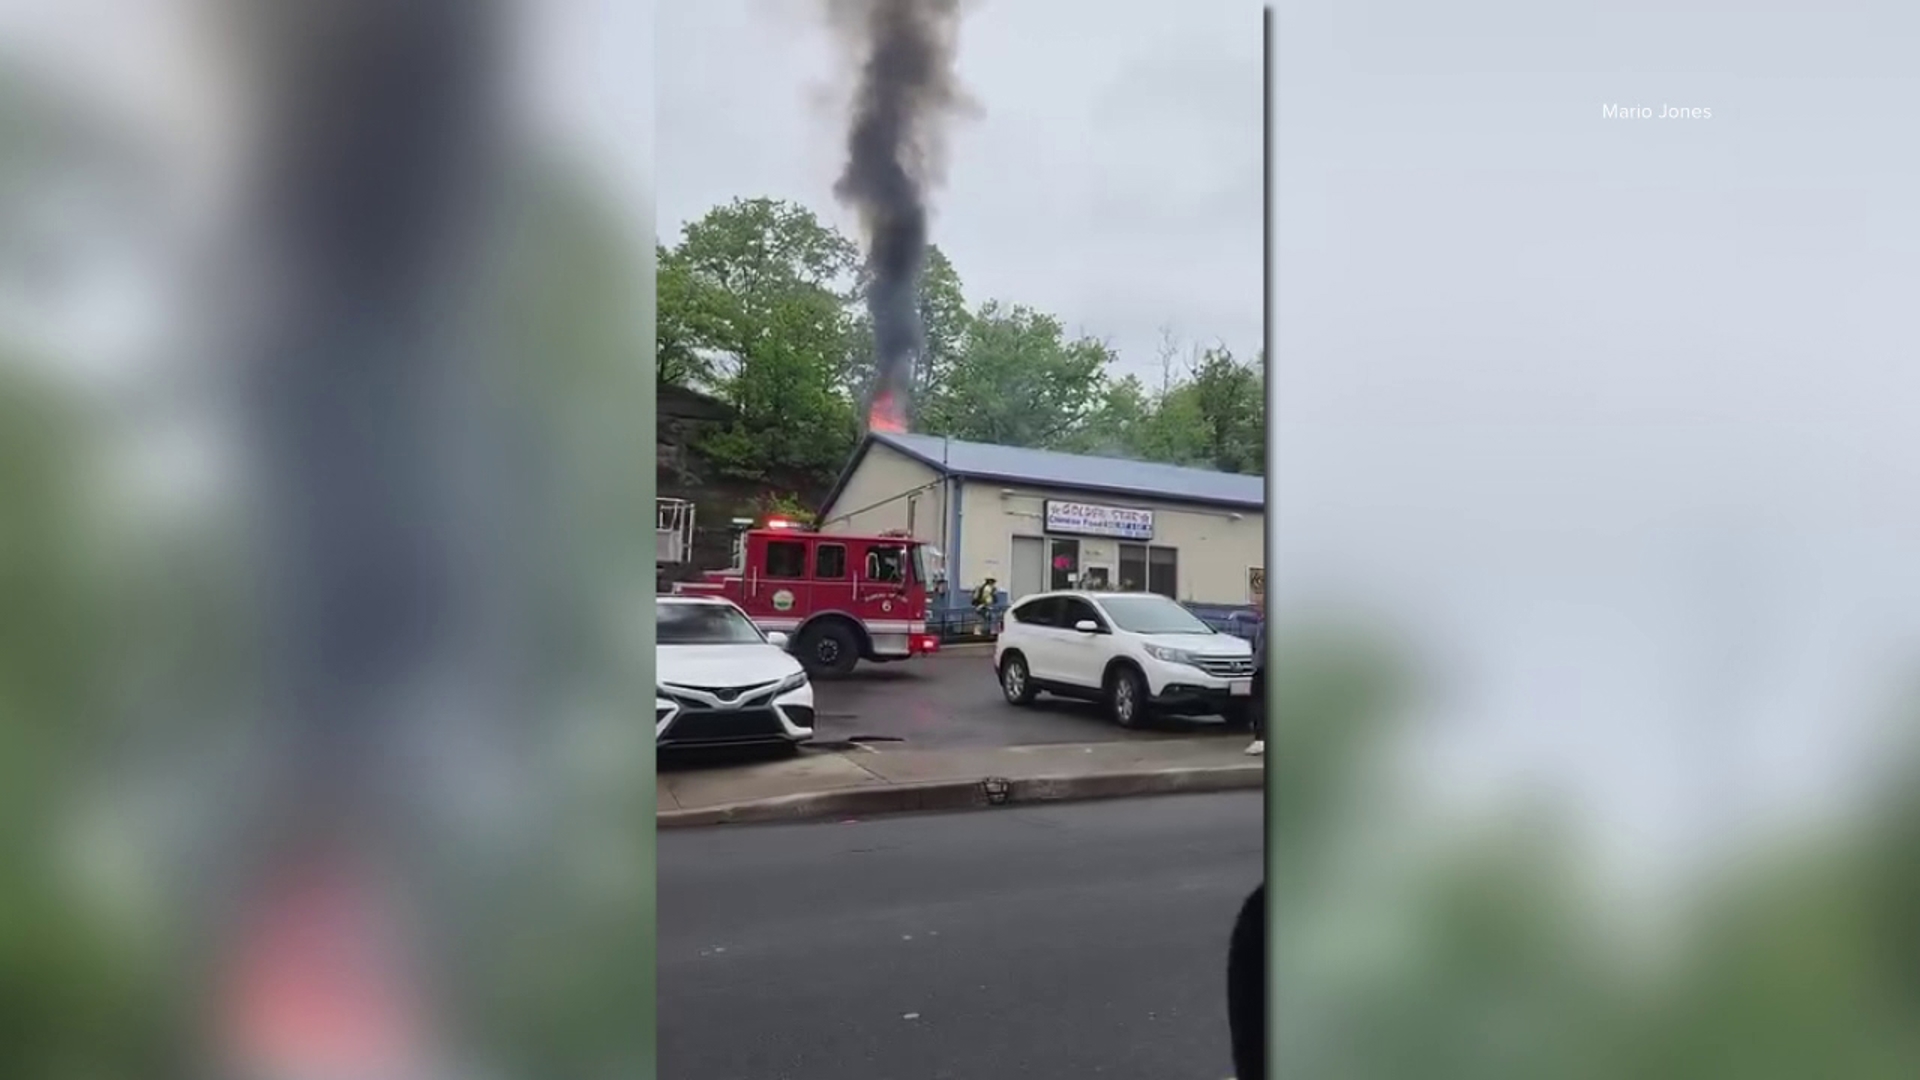 Flames broke out shortly before 4 p.m. Sunday along North River Street in Wilkes-Barre.